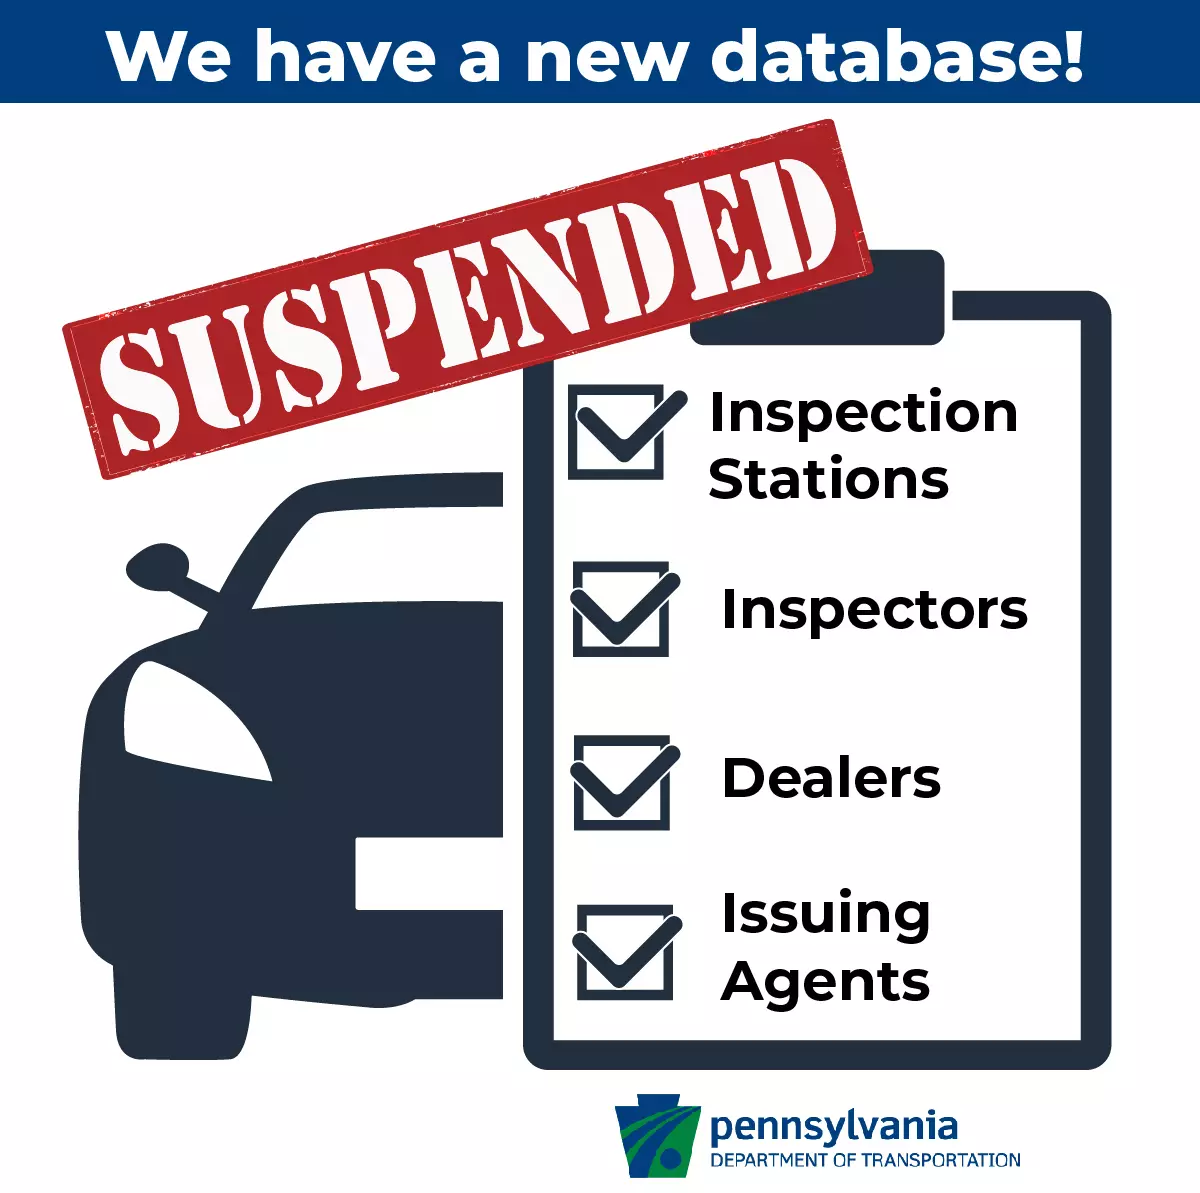 An infographic with a car and a clipboard with a checklist showing check marks next to inspection stations, inspectors, dealers, issuing agents, and the word suspended in white text on a red background at the top with the PennDOT blue and green logo at the bottom.